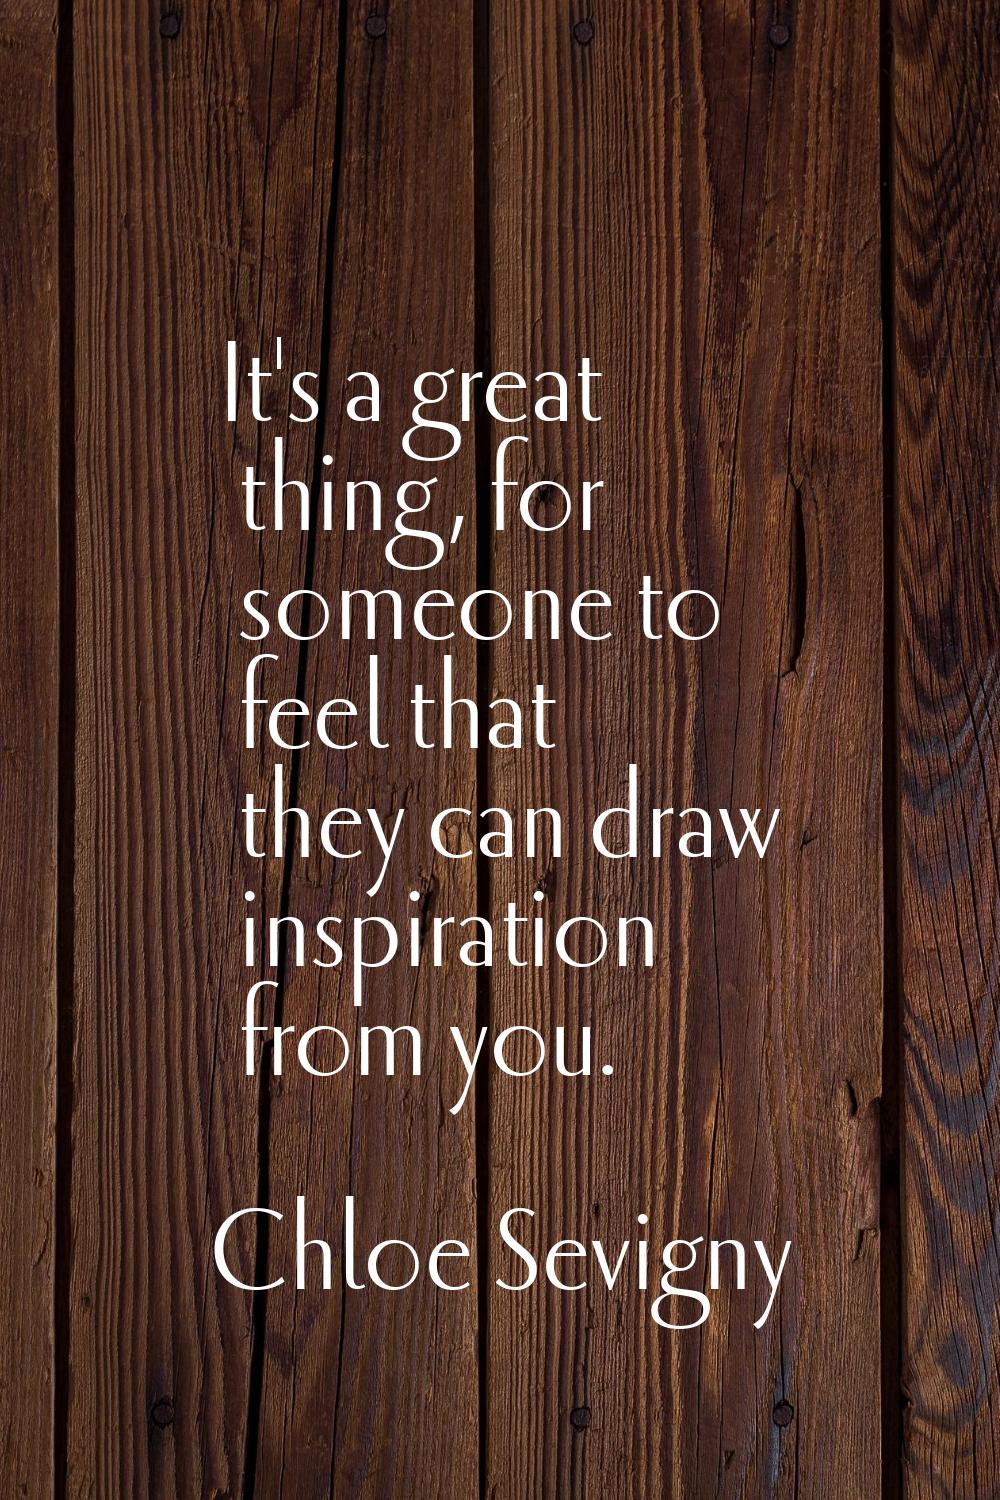 It's a great thing, for someone to feel that they can draw inspiration from you.